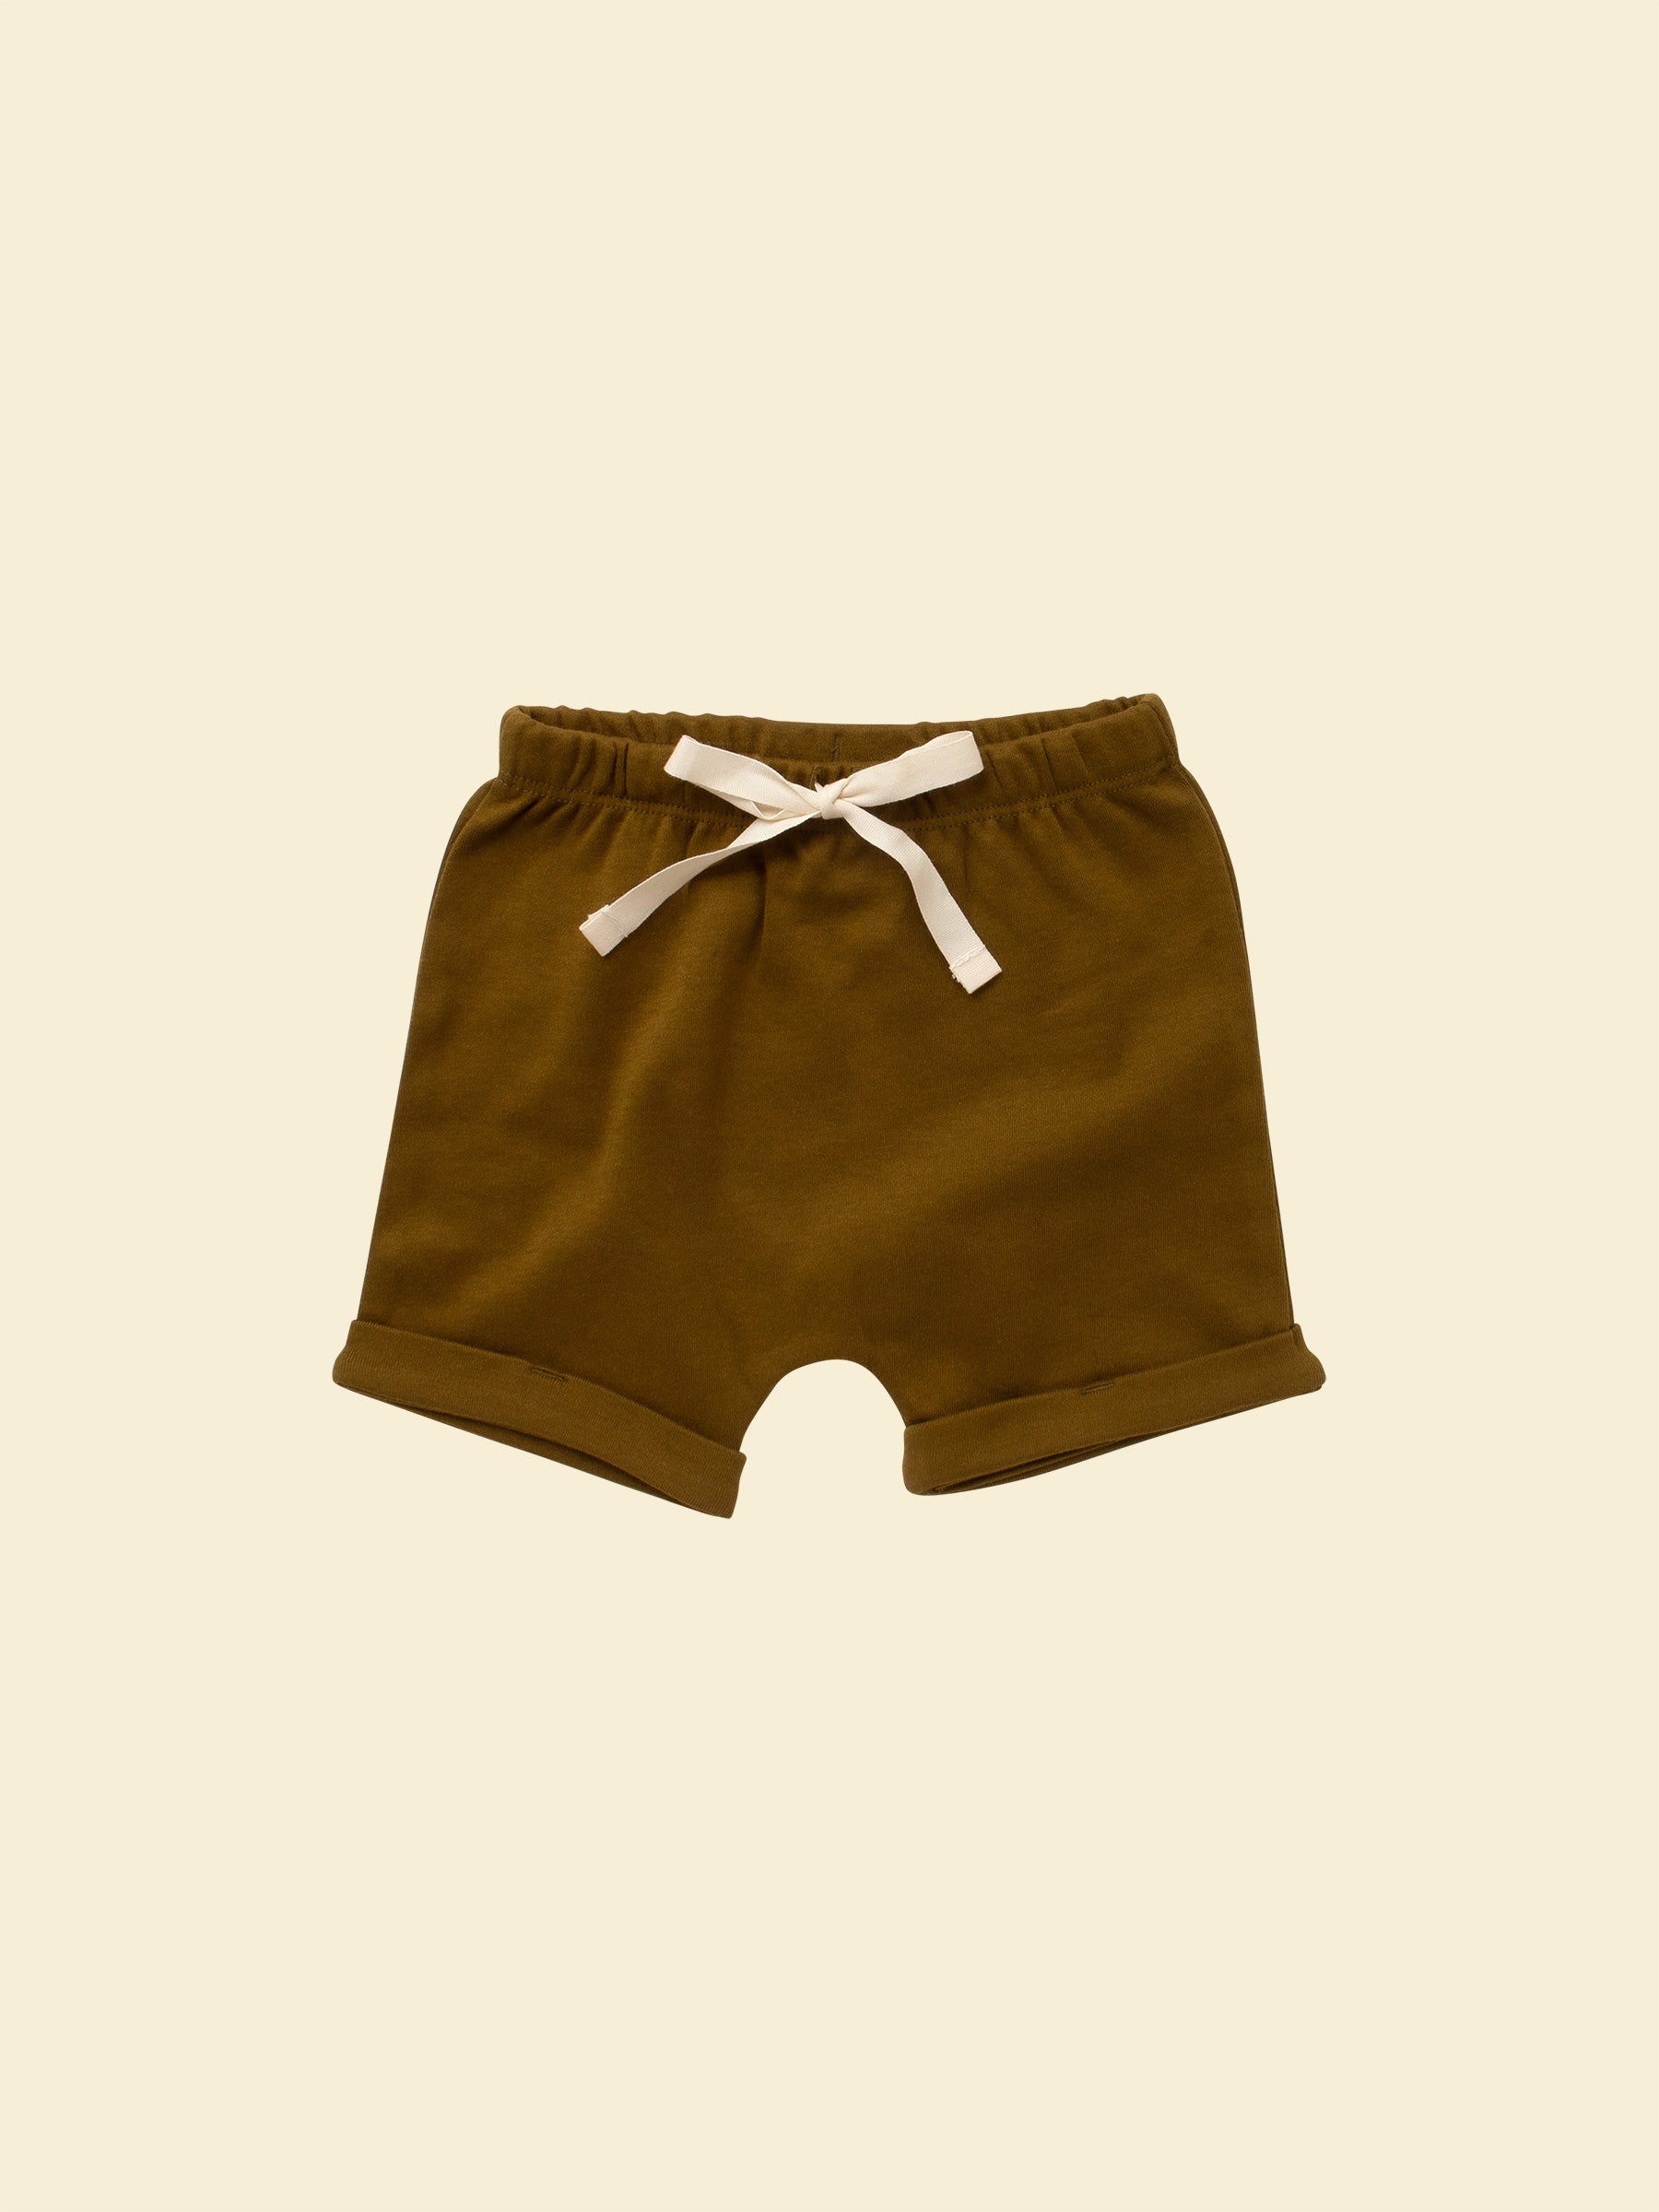 Baby & toddler shorts in Olive - 100% fairtrade organic cotton - Ziwi Baby